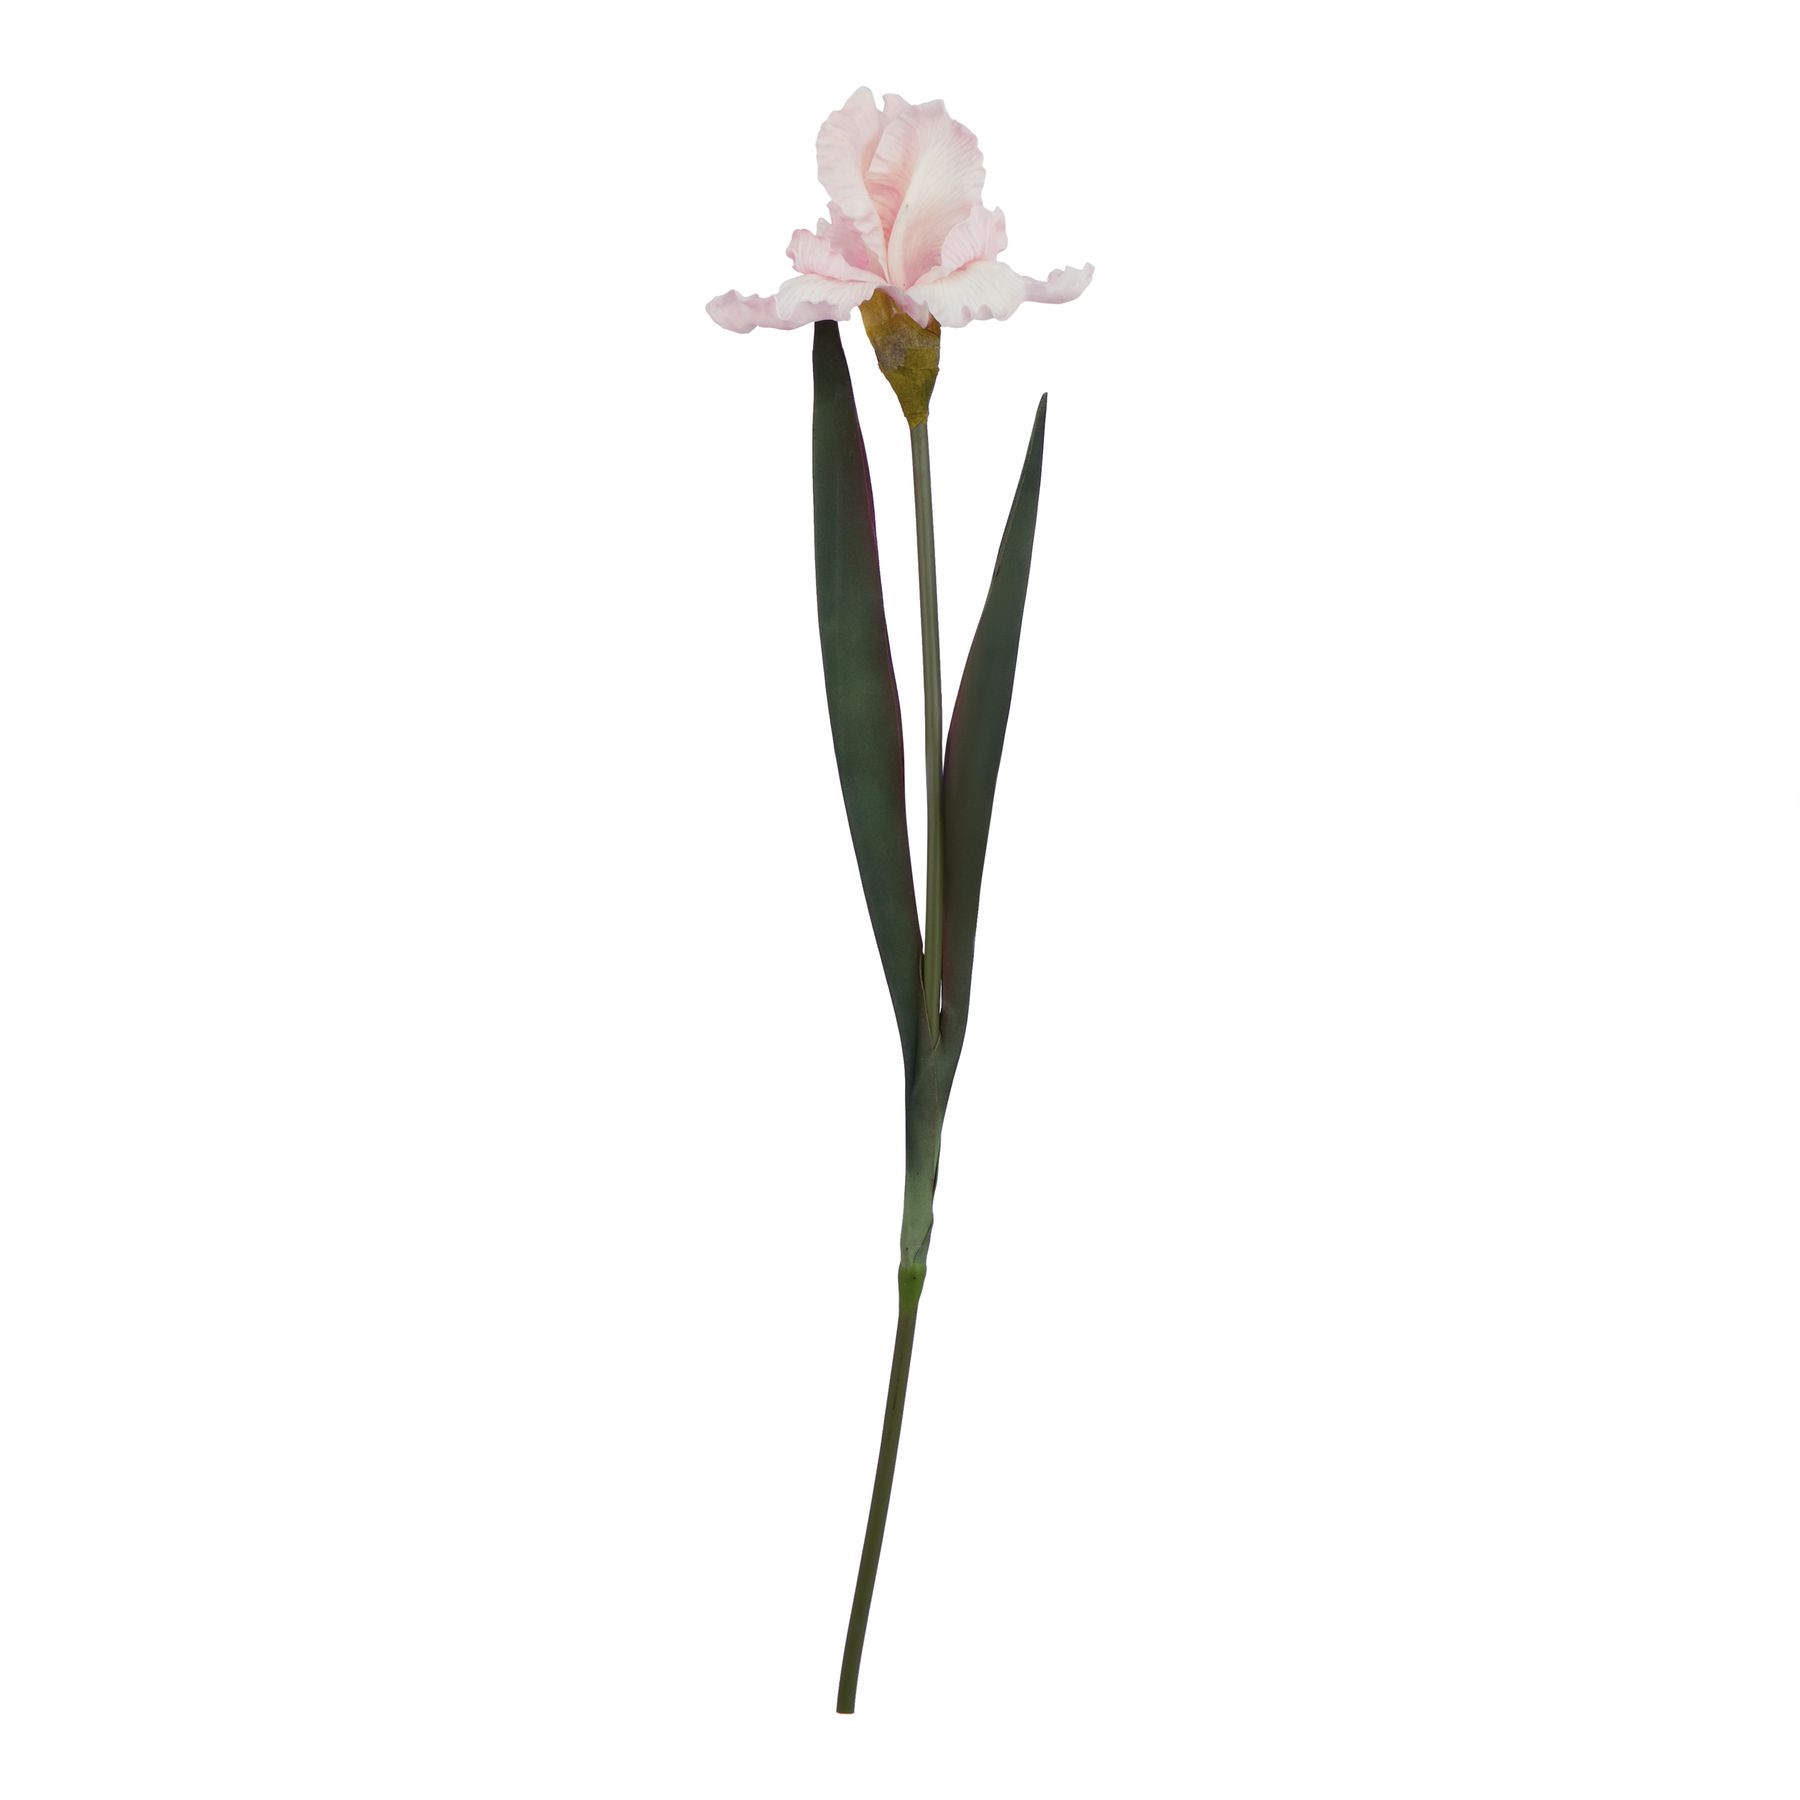 The Natural Garden Collection Pale Pink Fringed Iris - Image 1